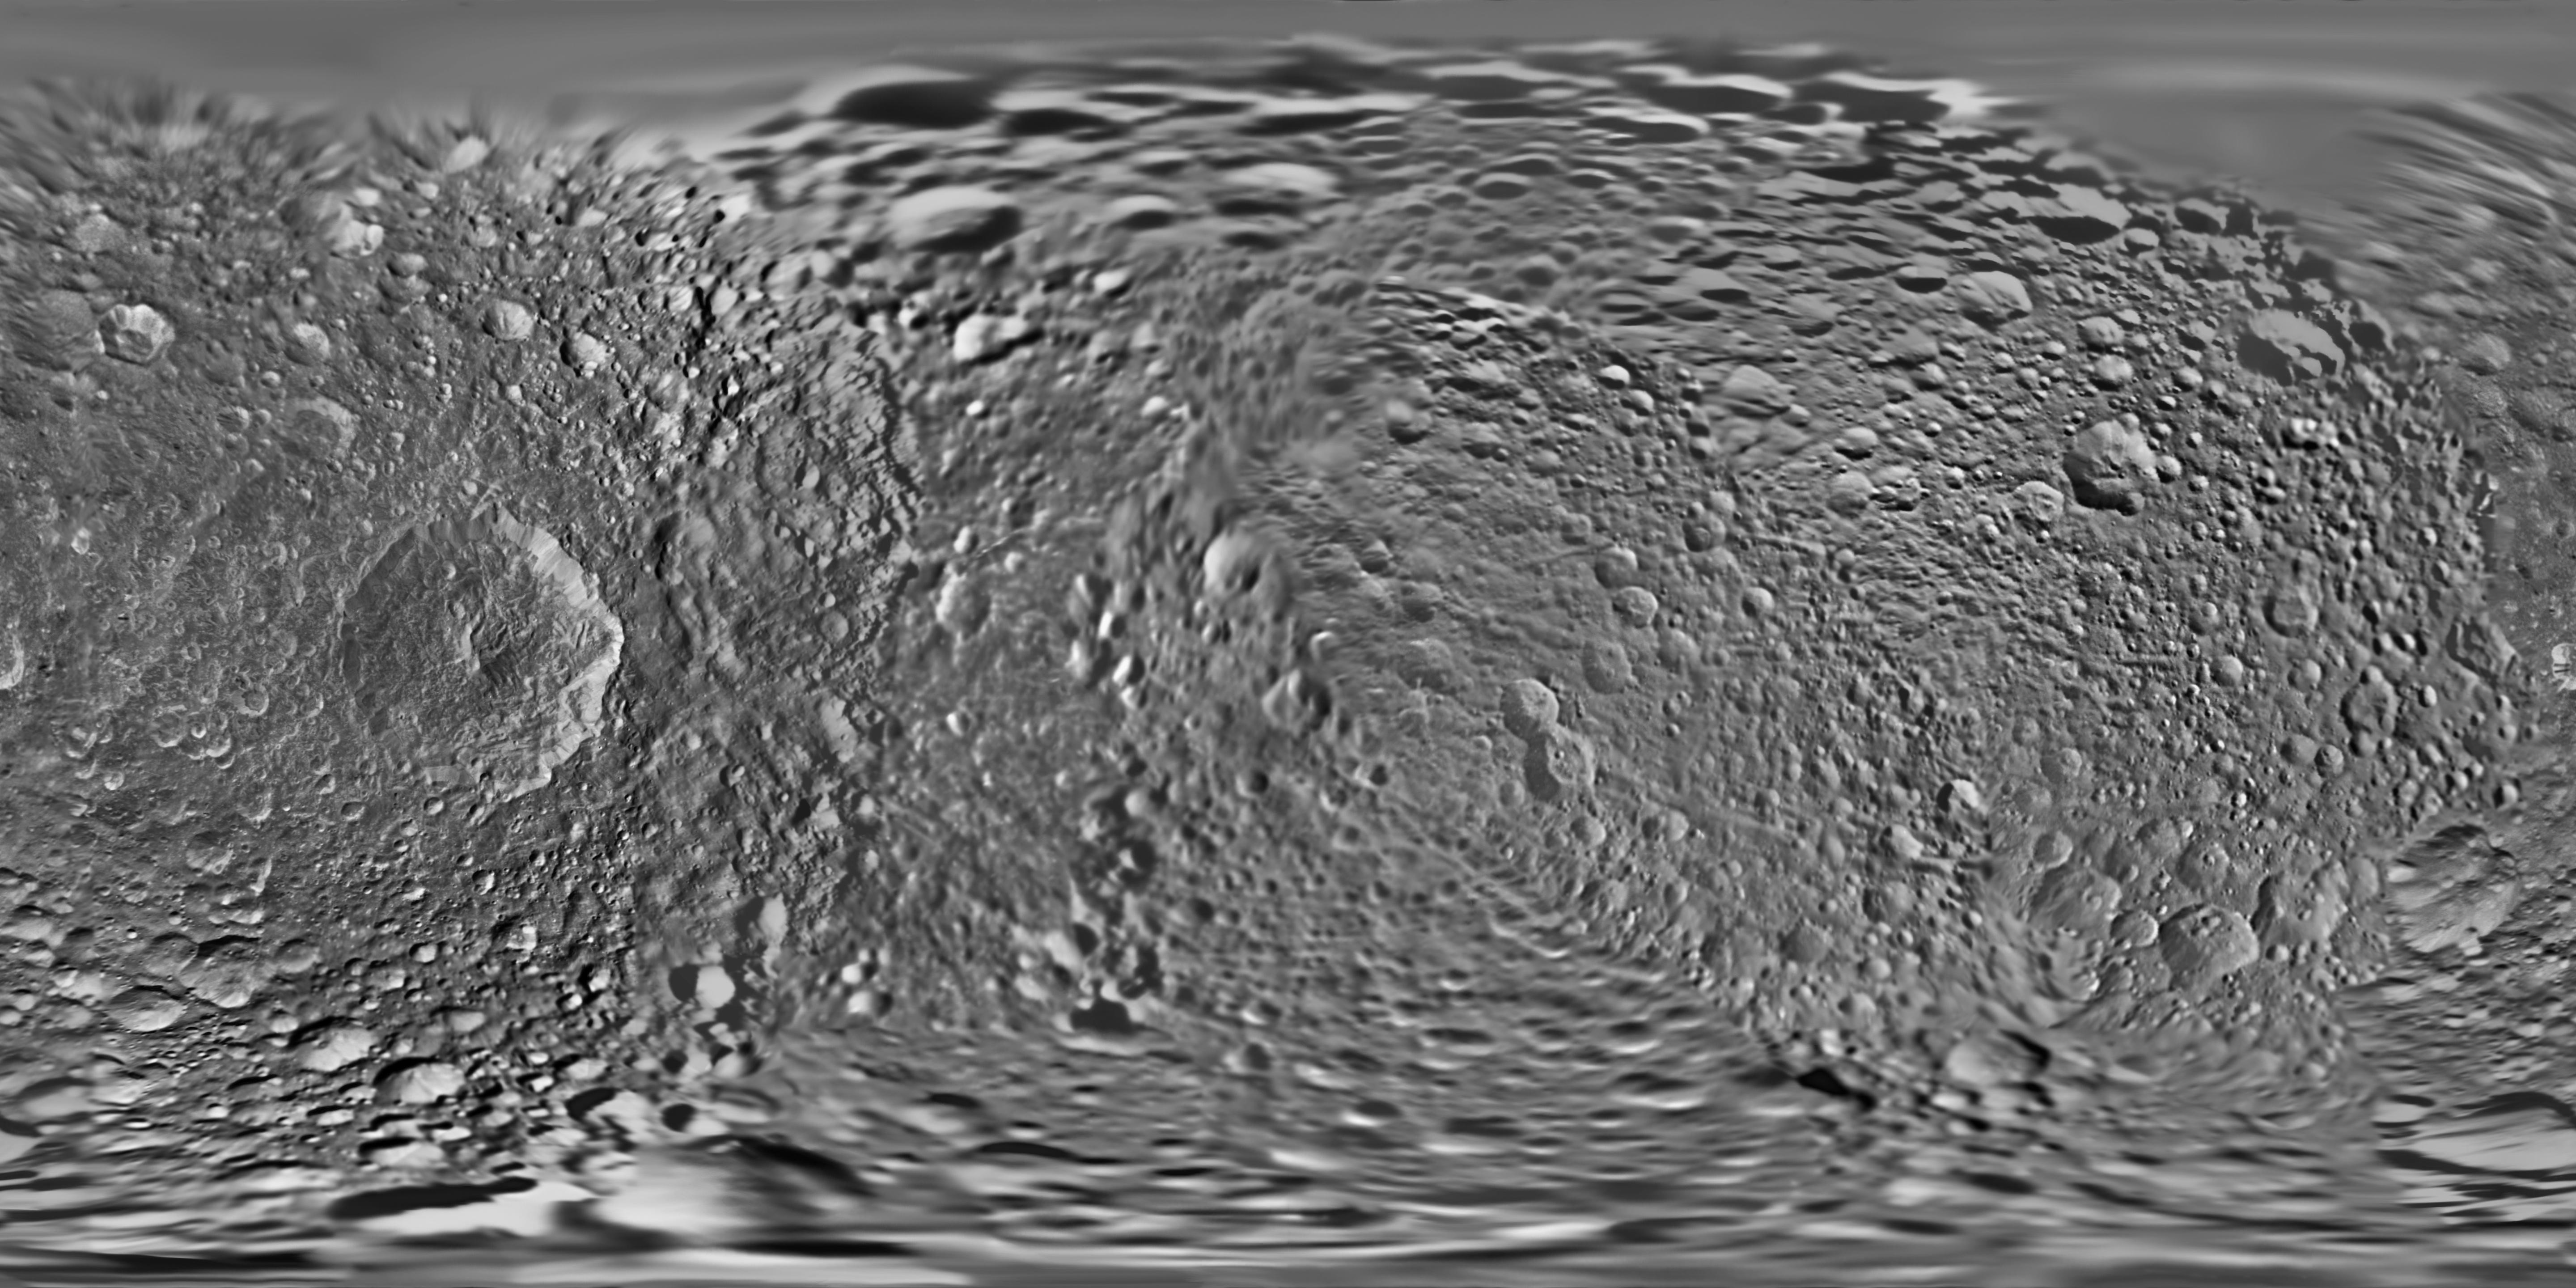 This global map of Saturn's moon Mimas was created using images taken during Cassini spacecraft flybys, with Voyager images filling in the gaps in Cassini's coverage.